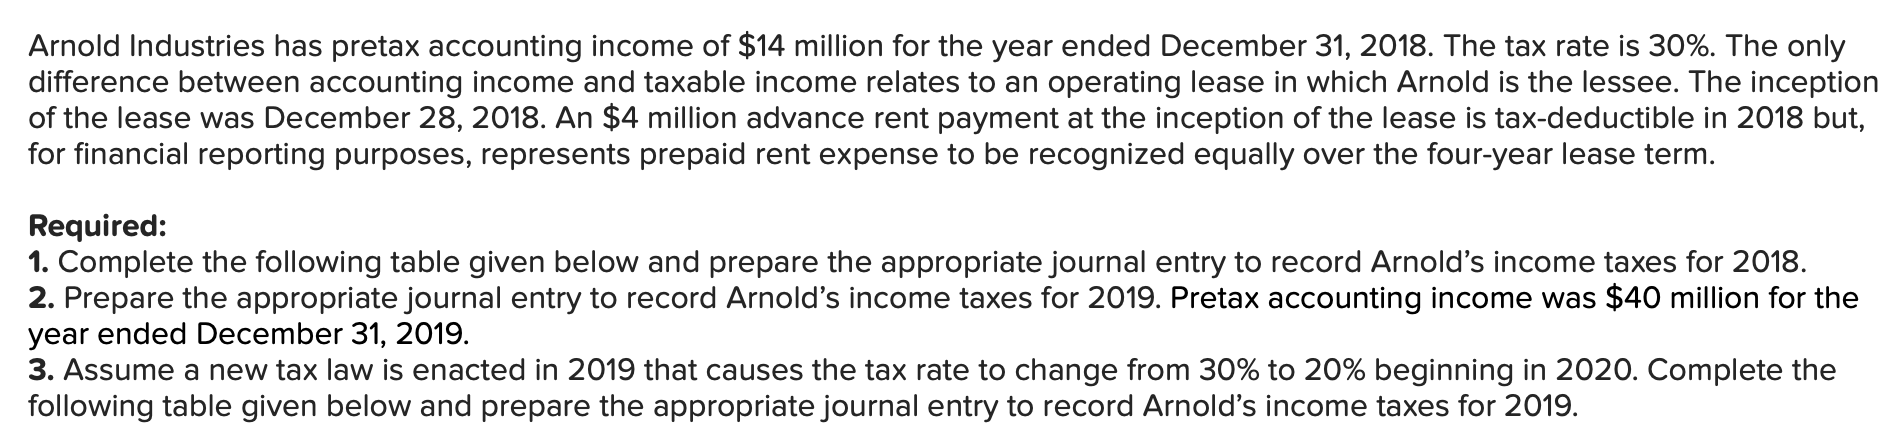 Arnold Industries has pretax accounting income of $14 million for the year ended December 31, 2018. The tax rate is 30%. The